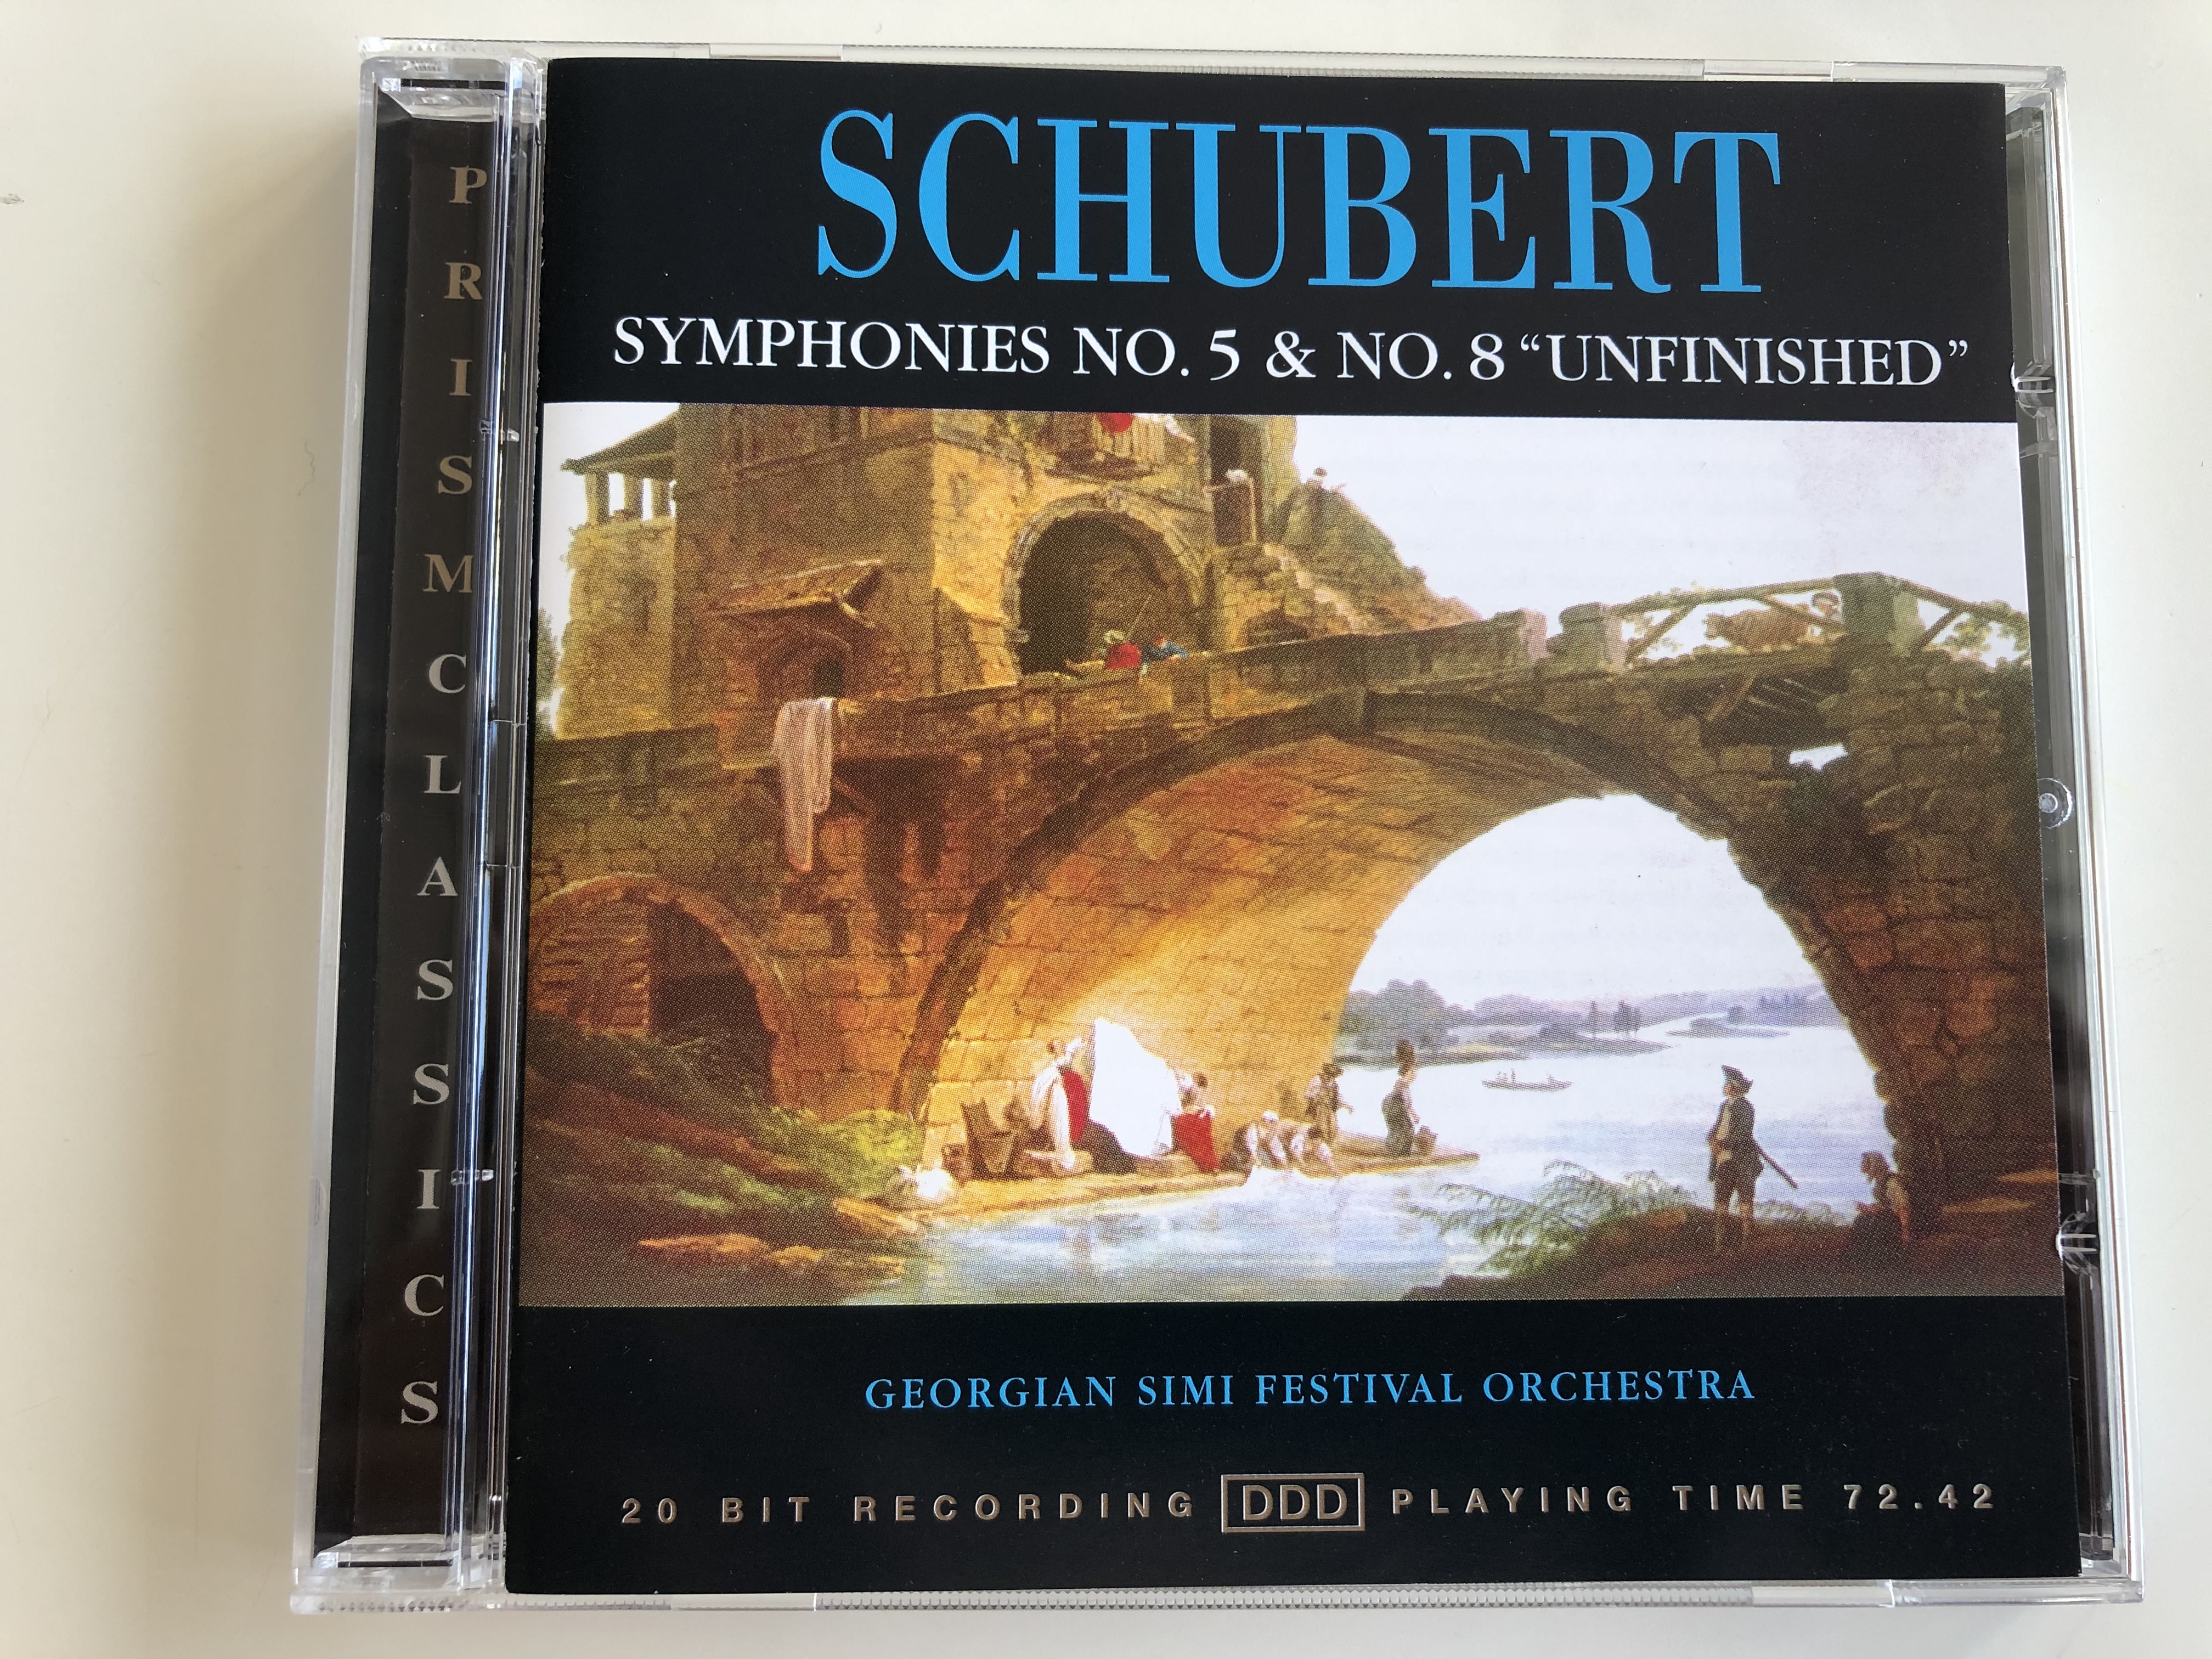 schubert-symphonies-no.5-no.8-unfinished-georgian-simi-festival-orchestra-playing-time-7242-prism-leisure-audio-cd-1997-pld-1221-1-.jpg